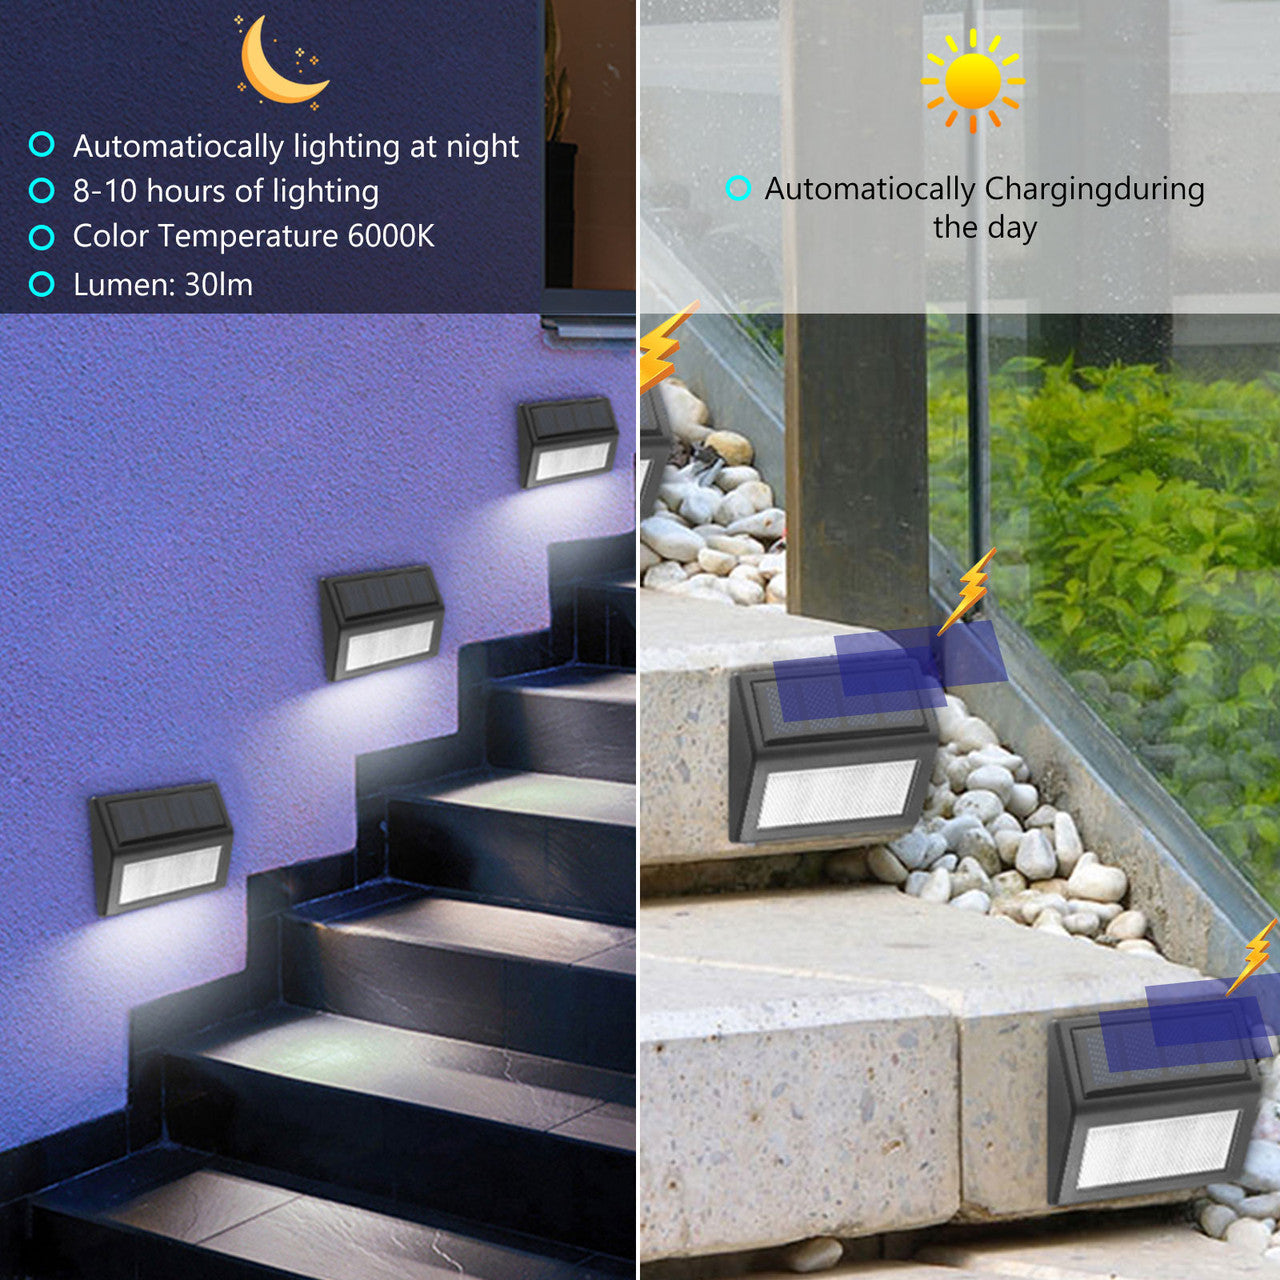 Solar Stair LED Wireless Waterproof Lighting, Wall Mount Sensor Night Light, Path Security Lamp, for Outdoor Deck, Patio, Stair, Yard, Path and Driveway, 2Pcs